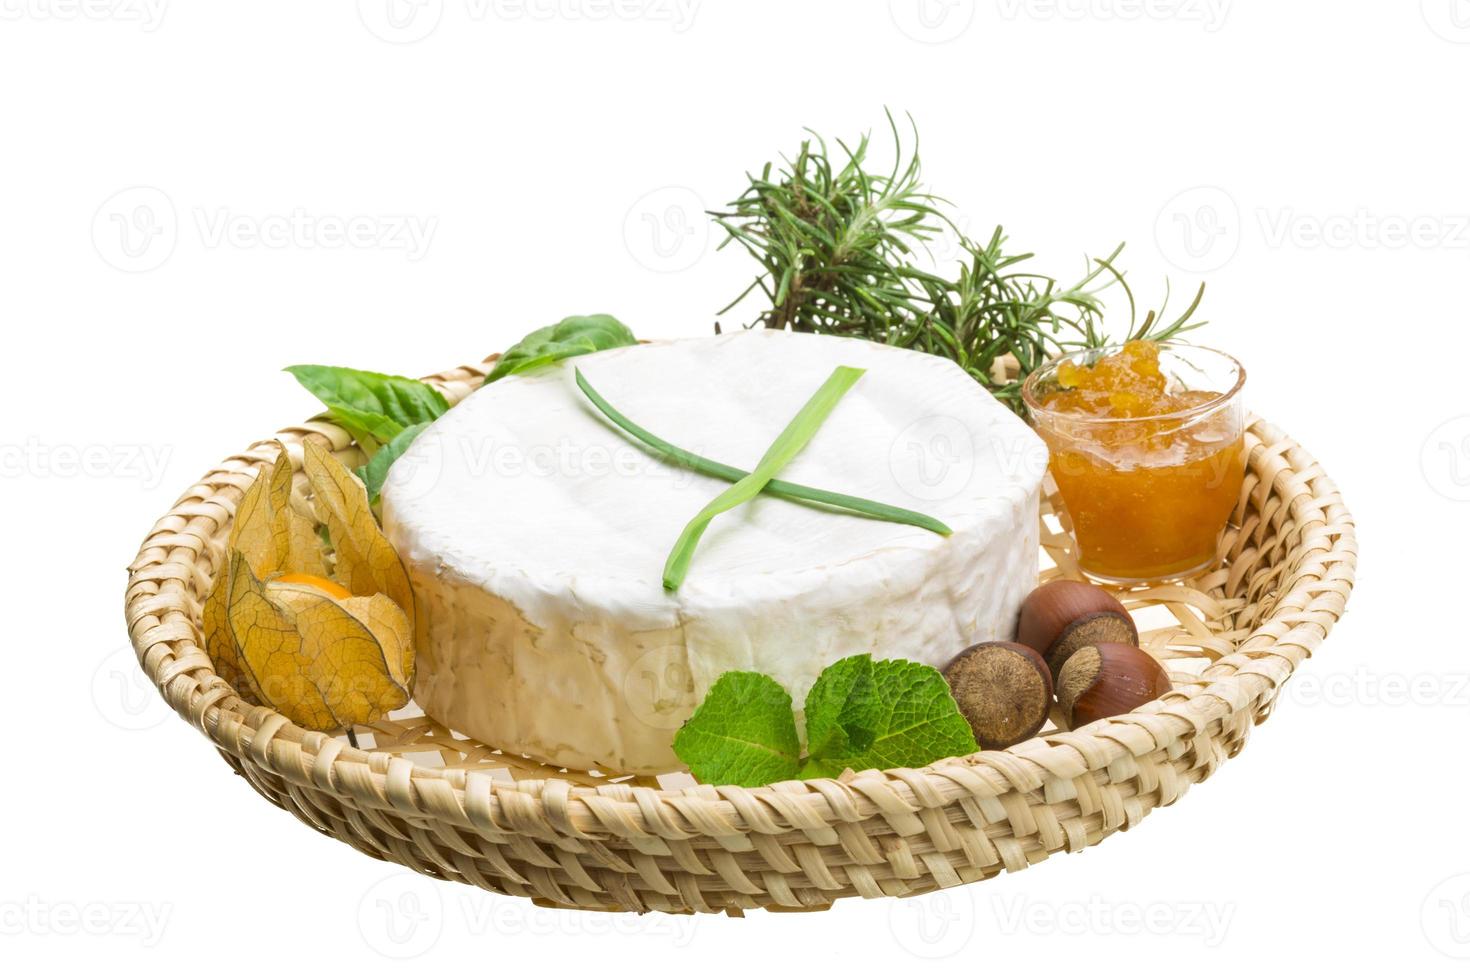 camembert witn herbs, nuts and honey photo